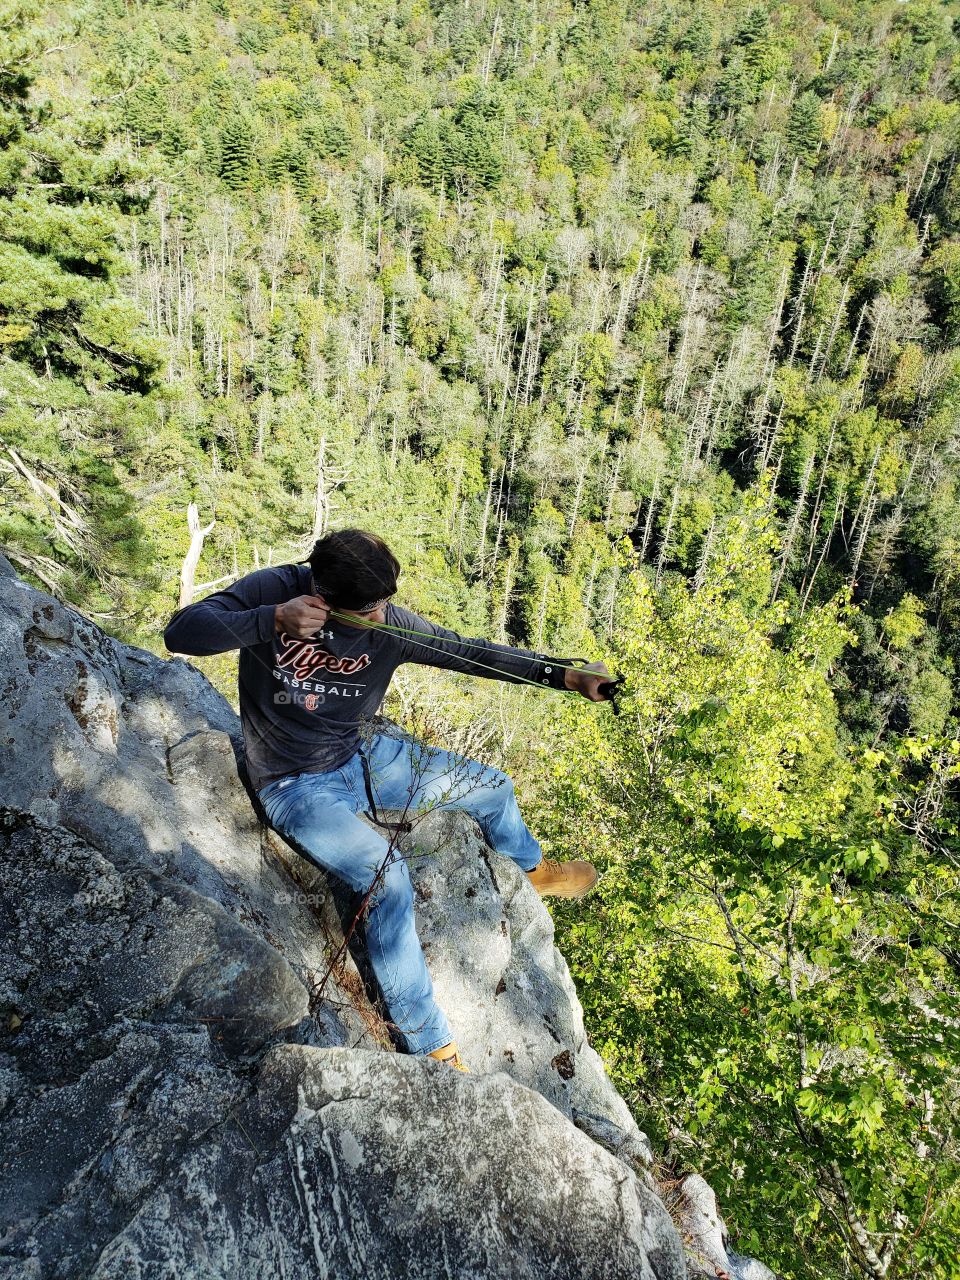 Aiming a slingshot while sitting on a cliff